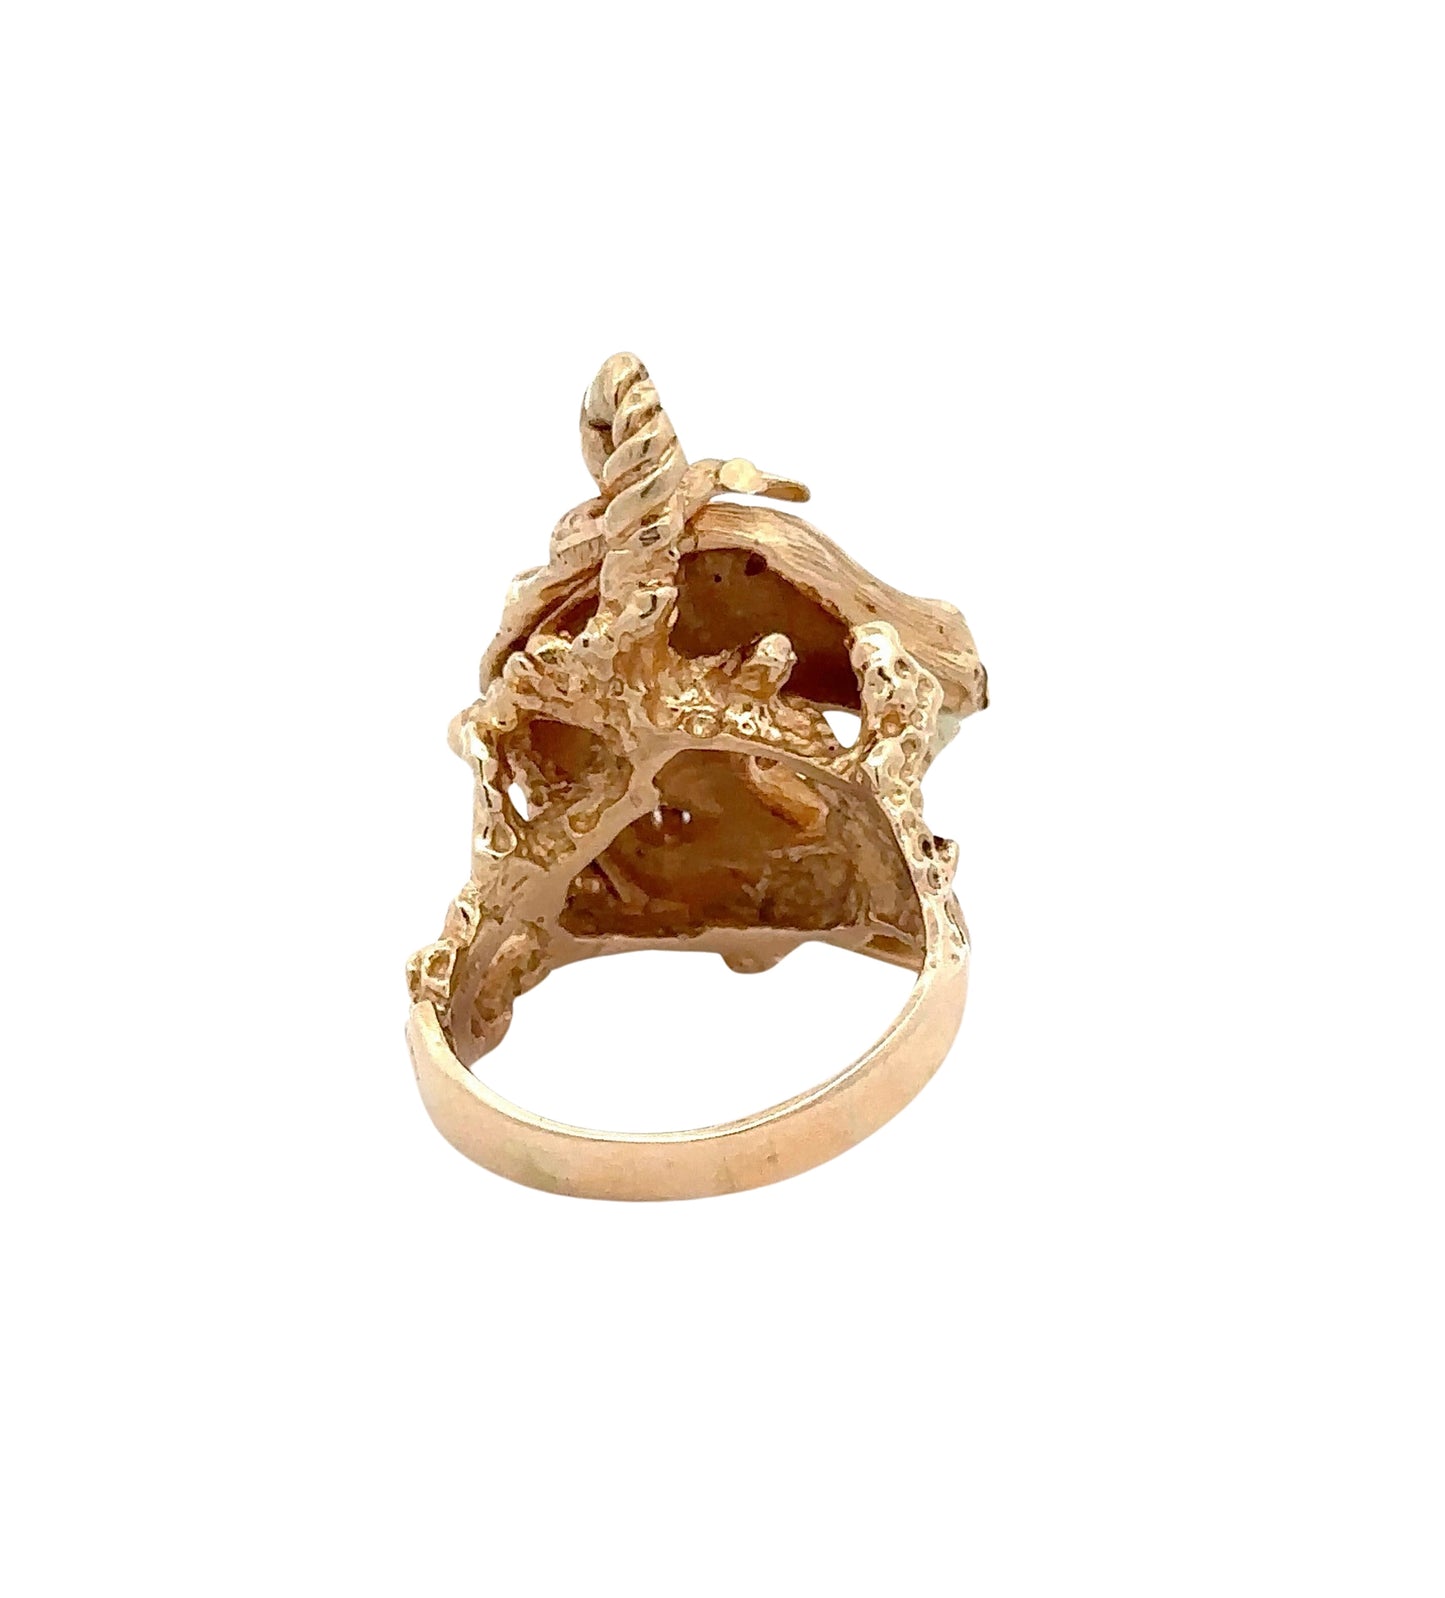 Back of yellow gold horse ring with scratches on band